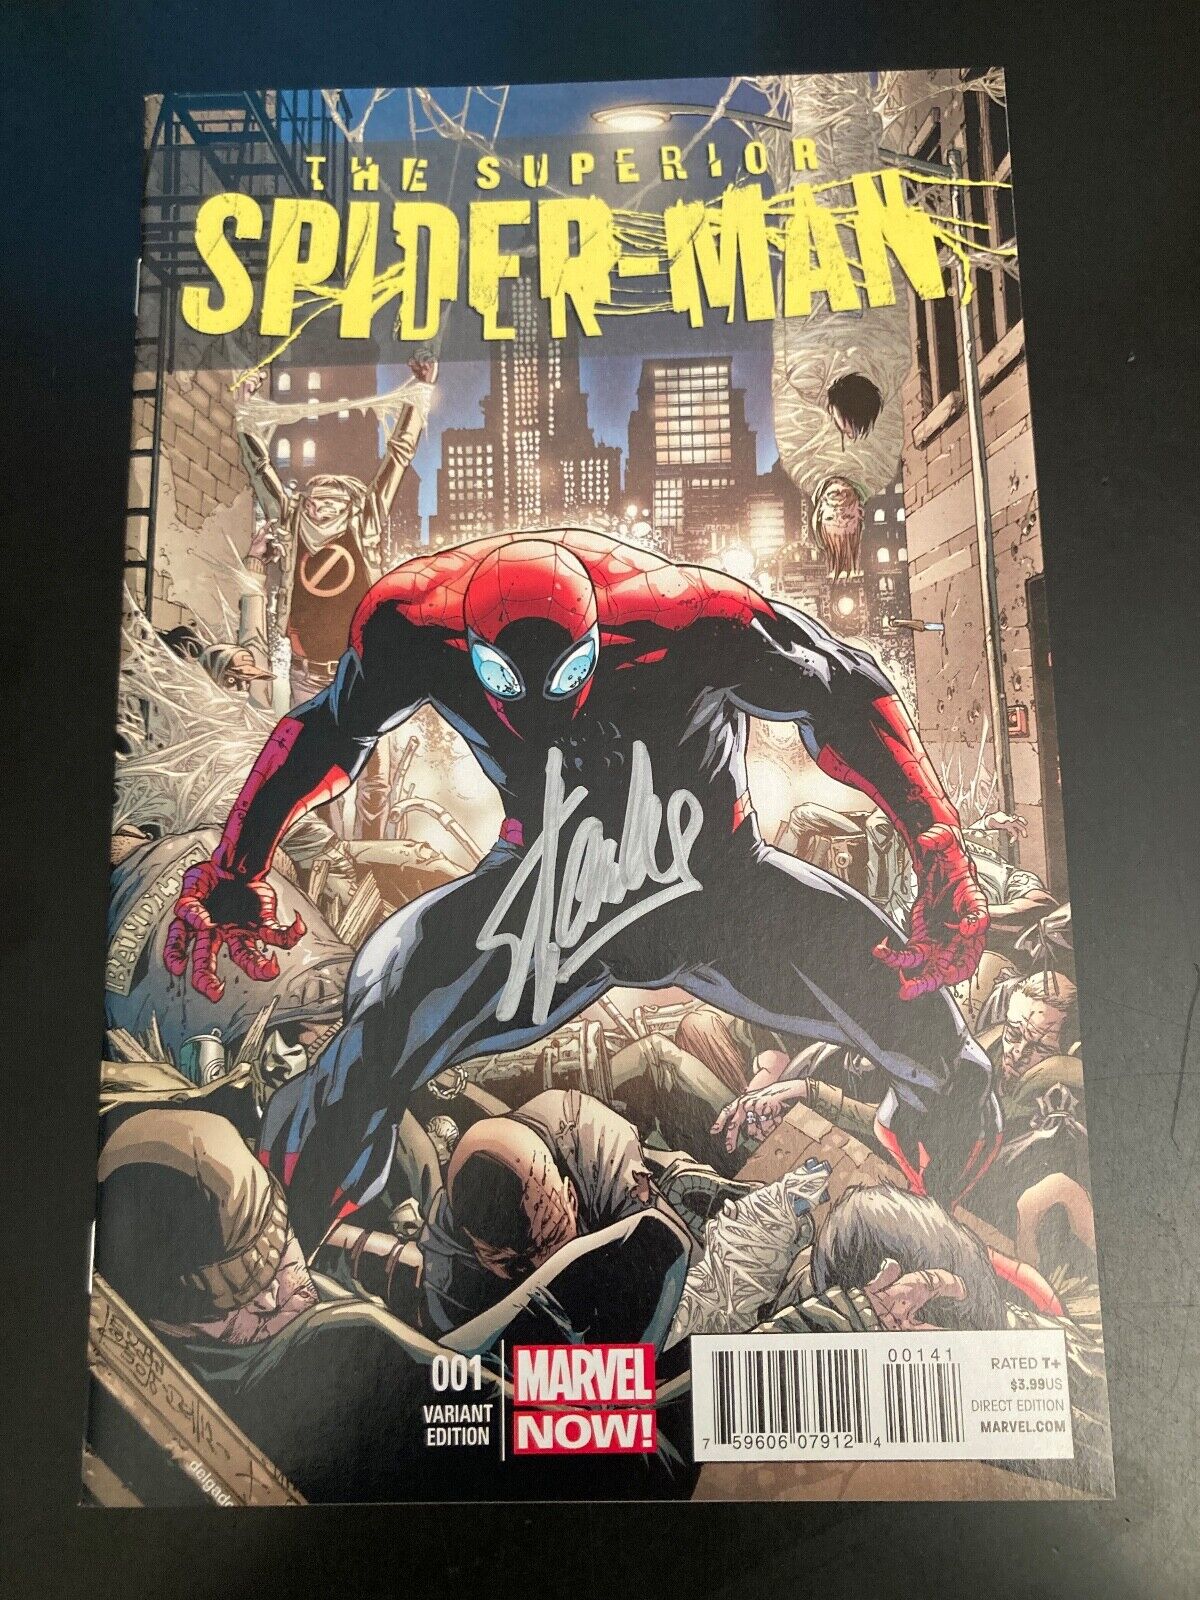 SUPERIOR SPIDER-MAN #1 (Variant) ***SIGNED BY STAN LEE*** (NM/9.4) COA